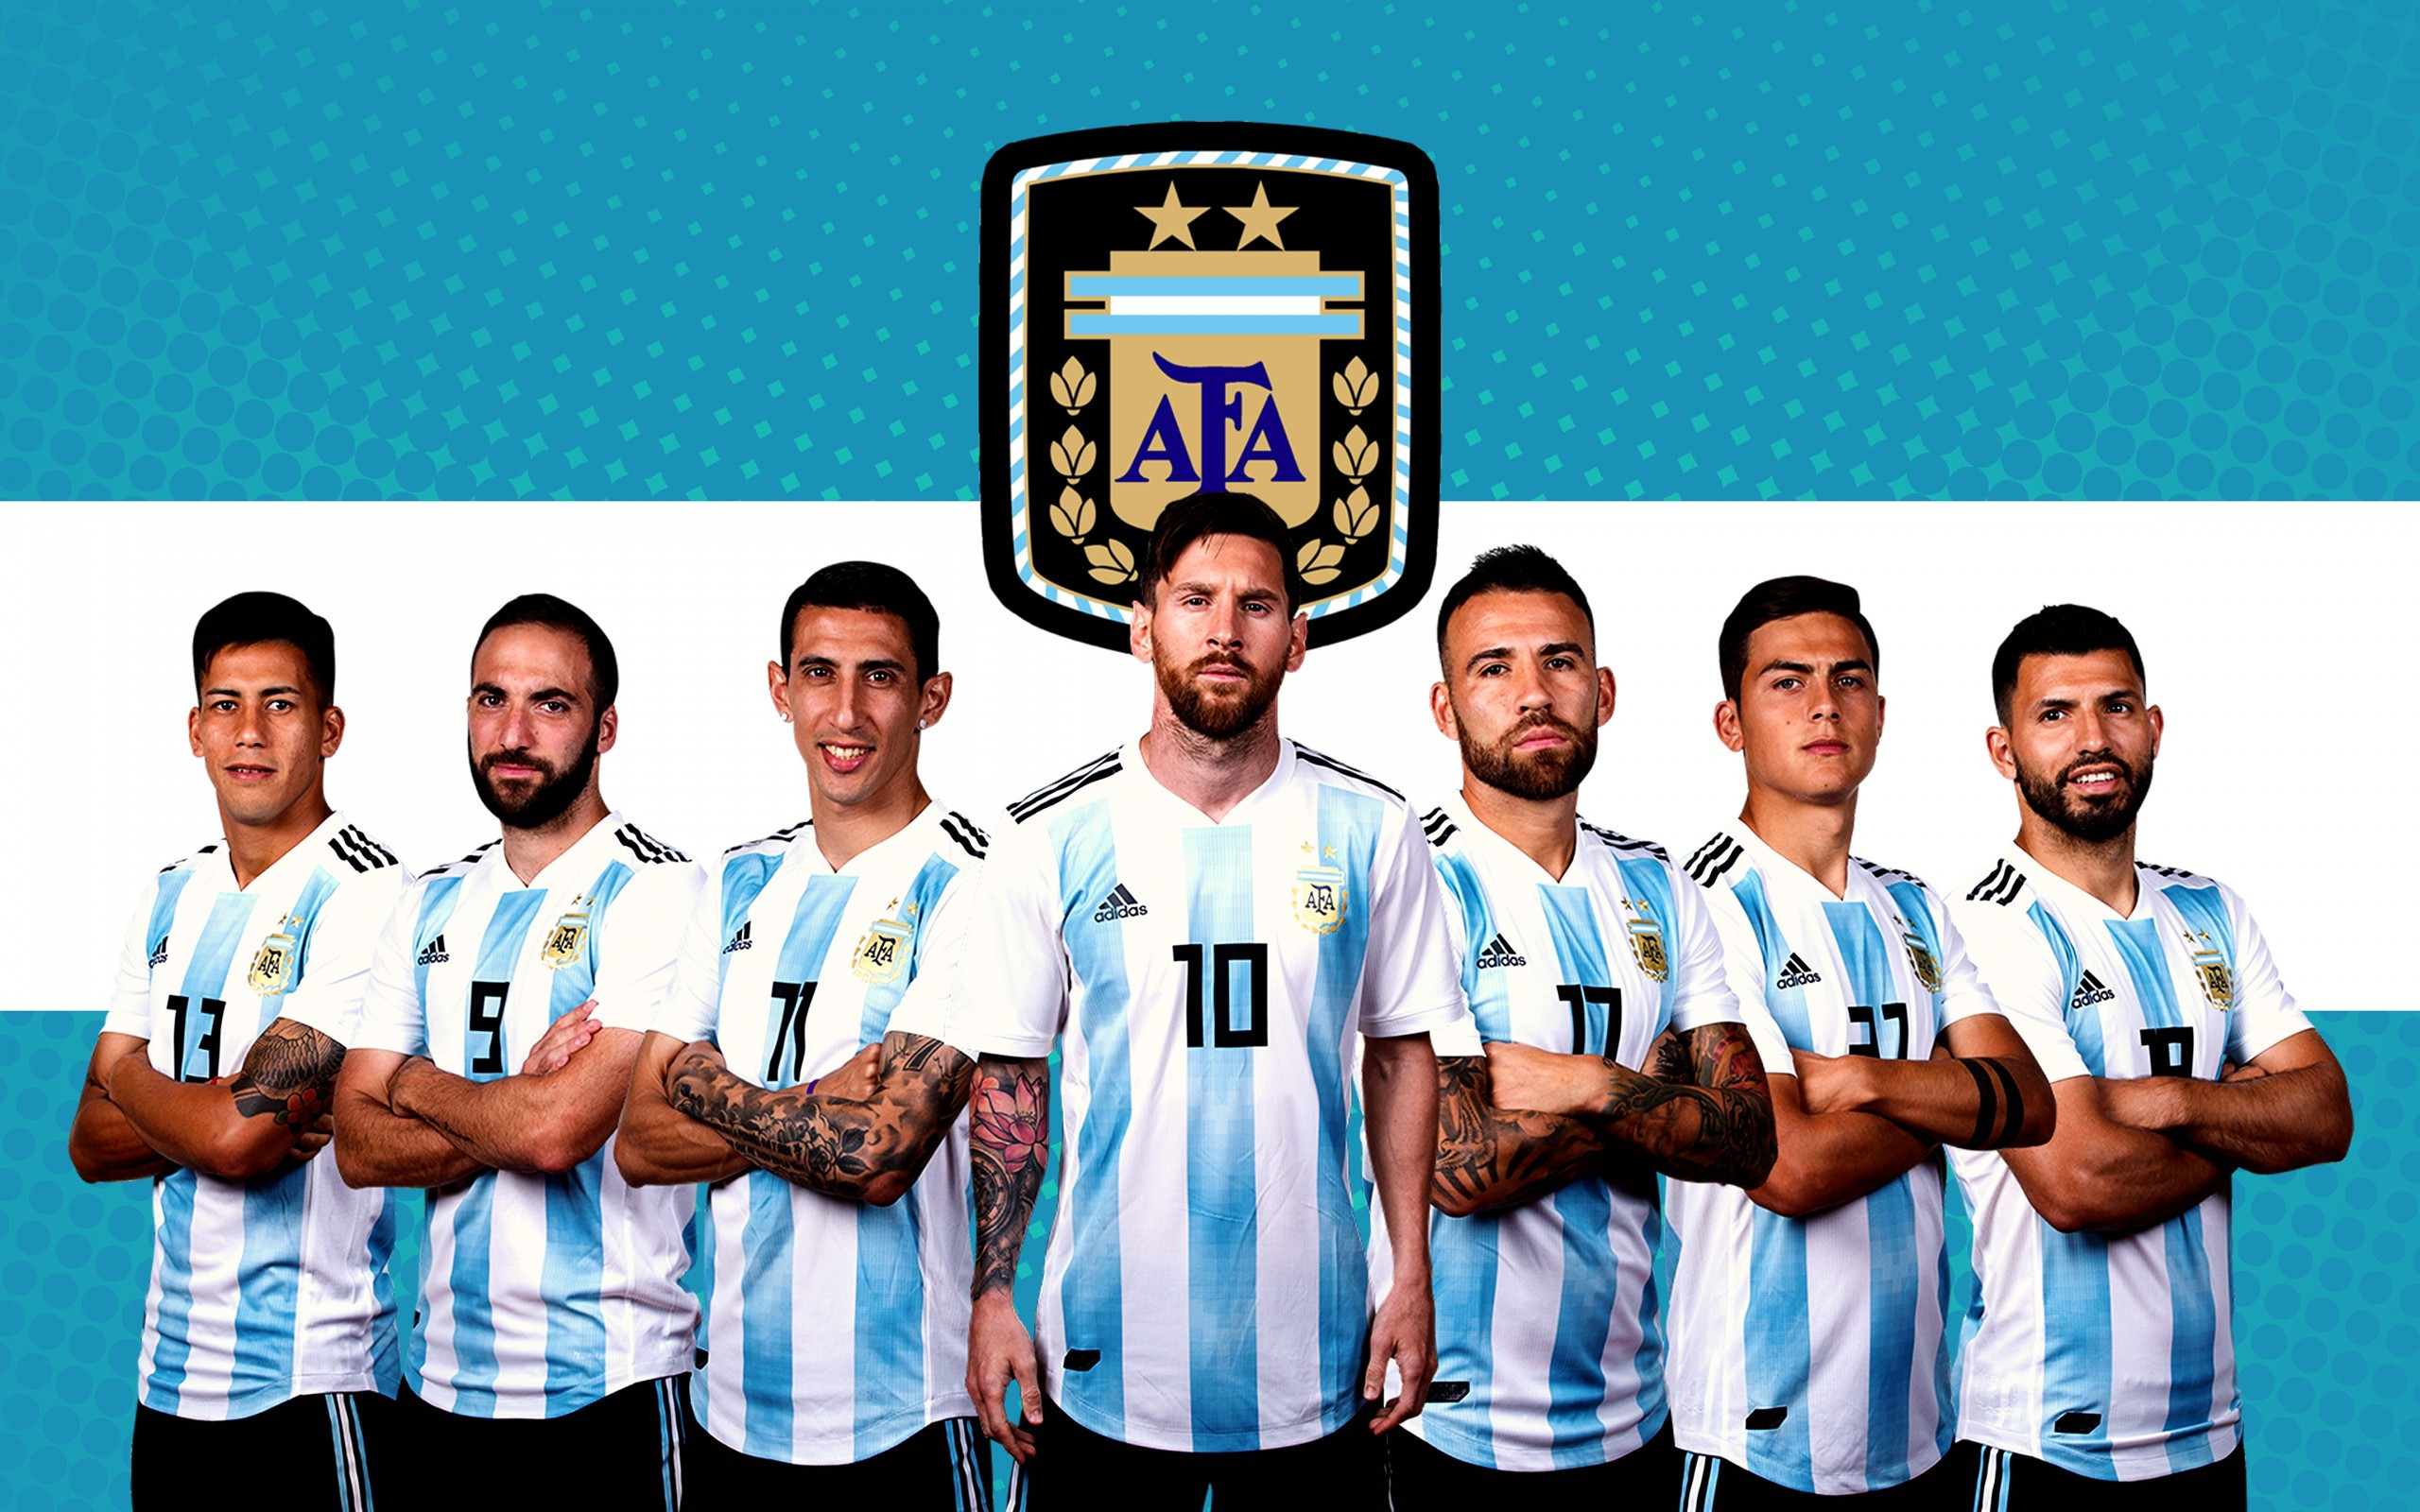 Download 2560x1600 Argentine, National Football Team Wallpaper for MacBook Pro 13 inch